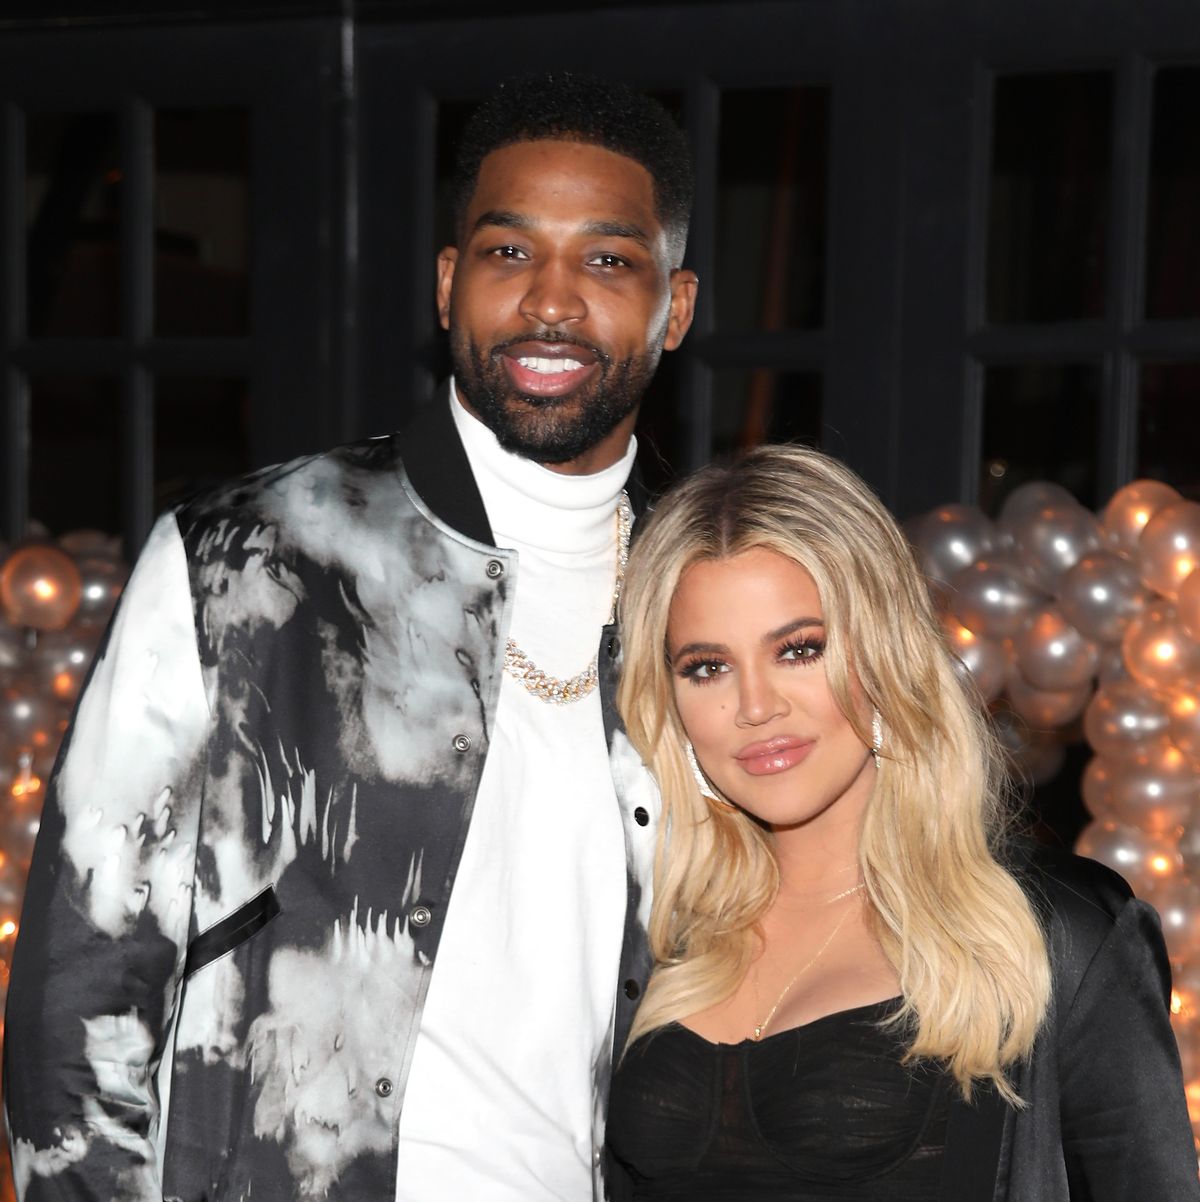 Khloe and Tristan2